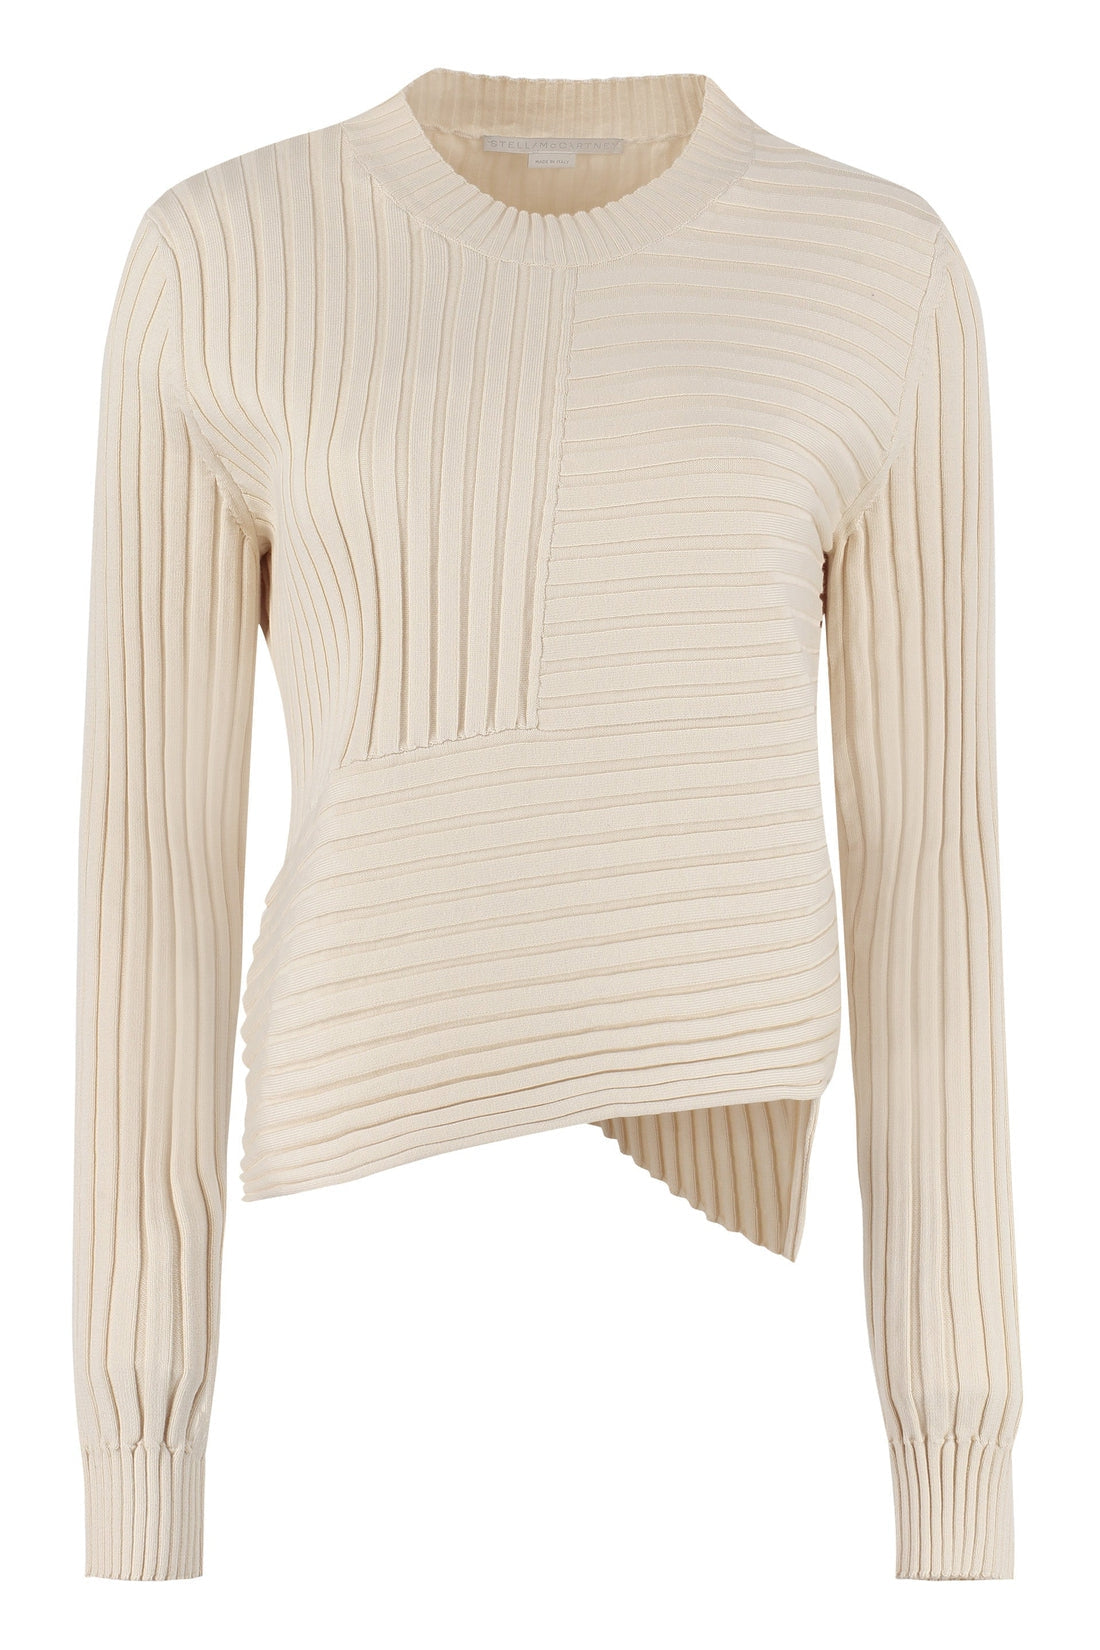 Stella McCartney-OUTLET-SALE-Ribbed cotton sweater-ARCHIVIST